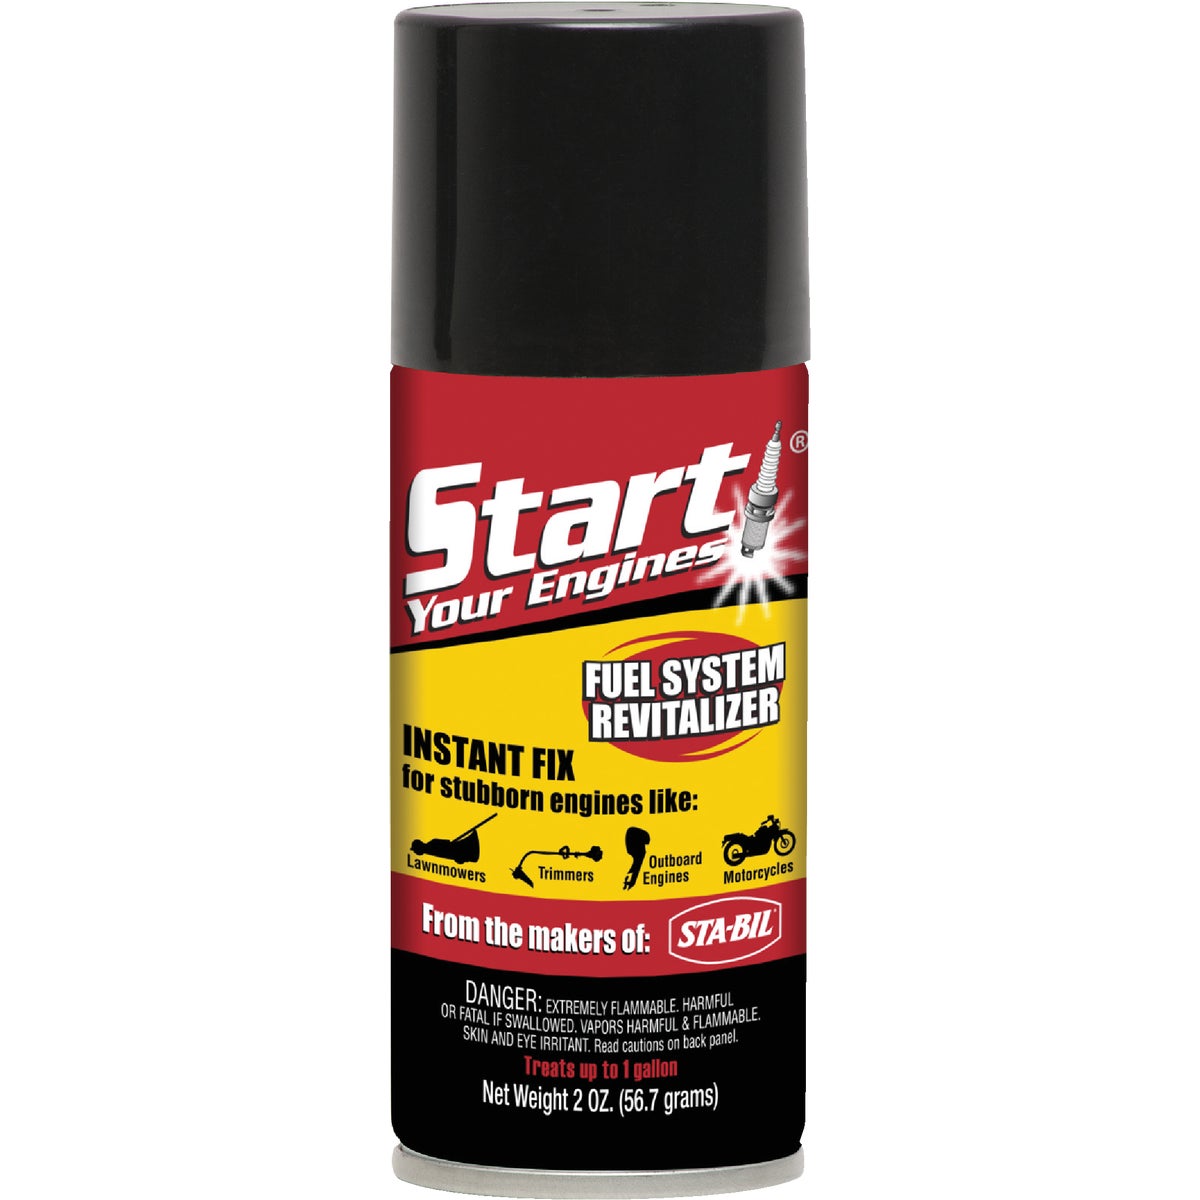 Item 575453, Start Your Engines! fuel system revitalizer is designed to ensure easy 